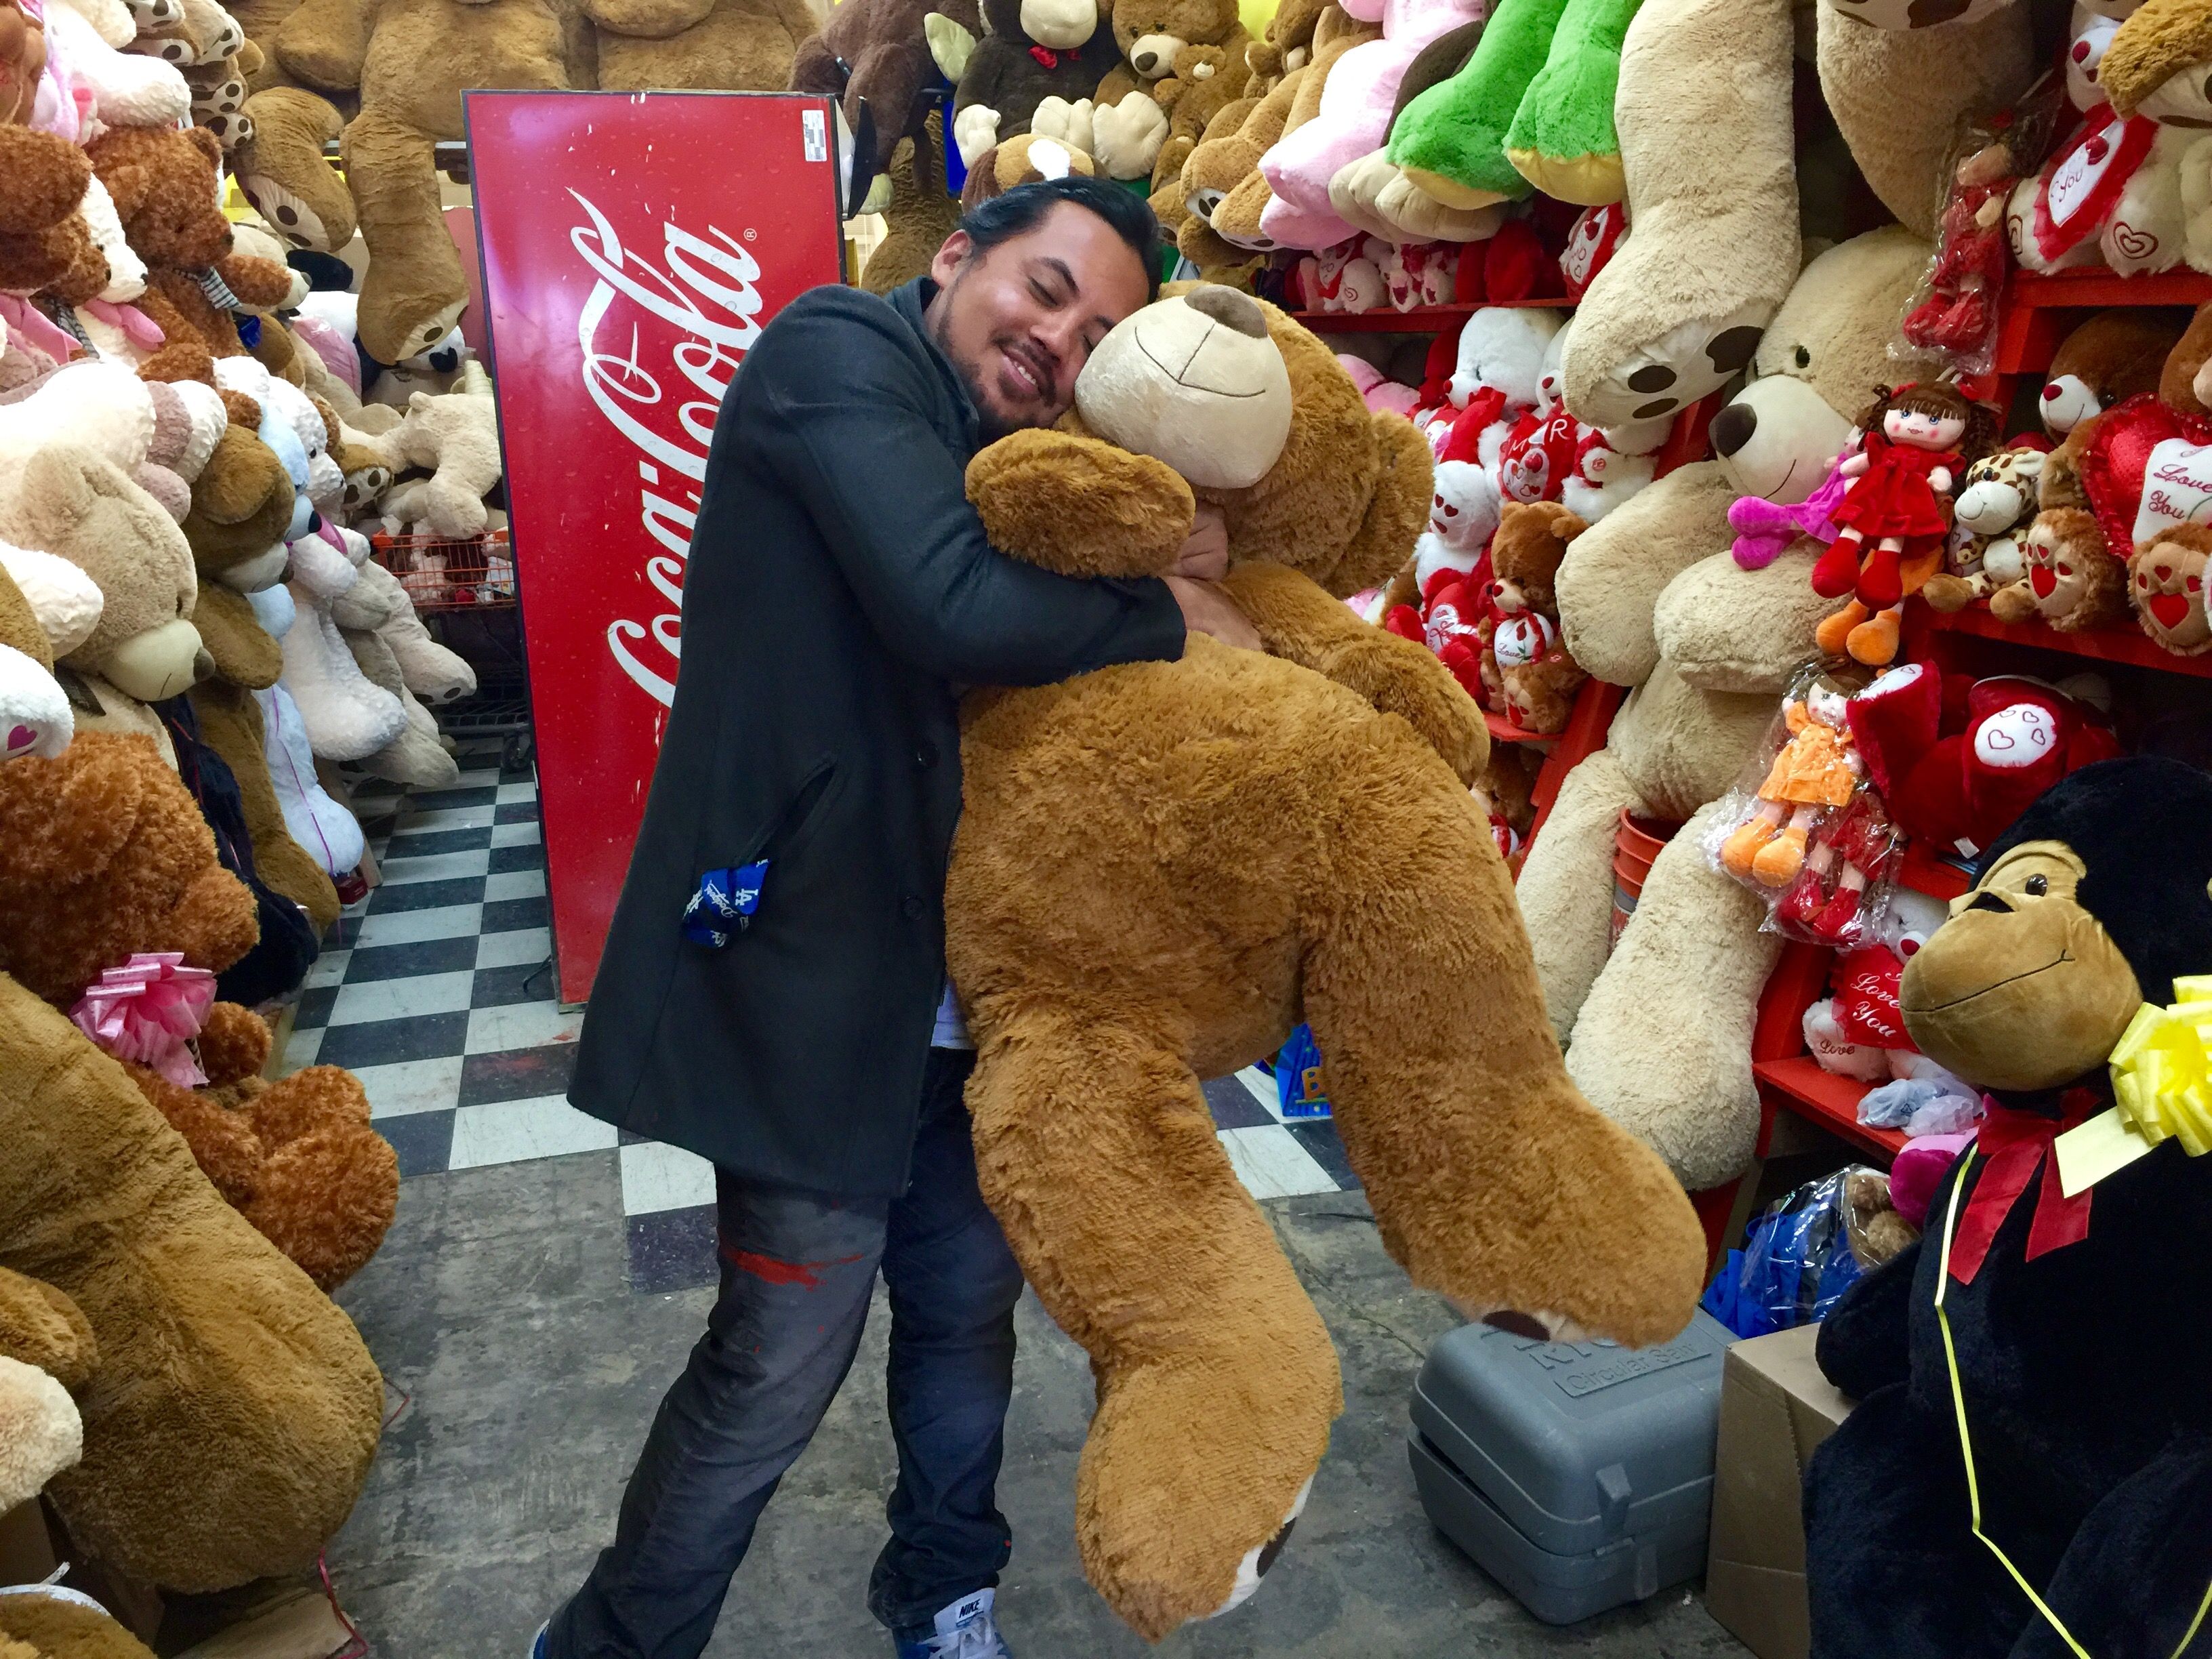 Joshua Montalvo is happy to have opened a giant teddy bear business in South Los Angeles to start giving a positive image to the area where he lives. (Araceli Martinez / La Opinion).